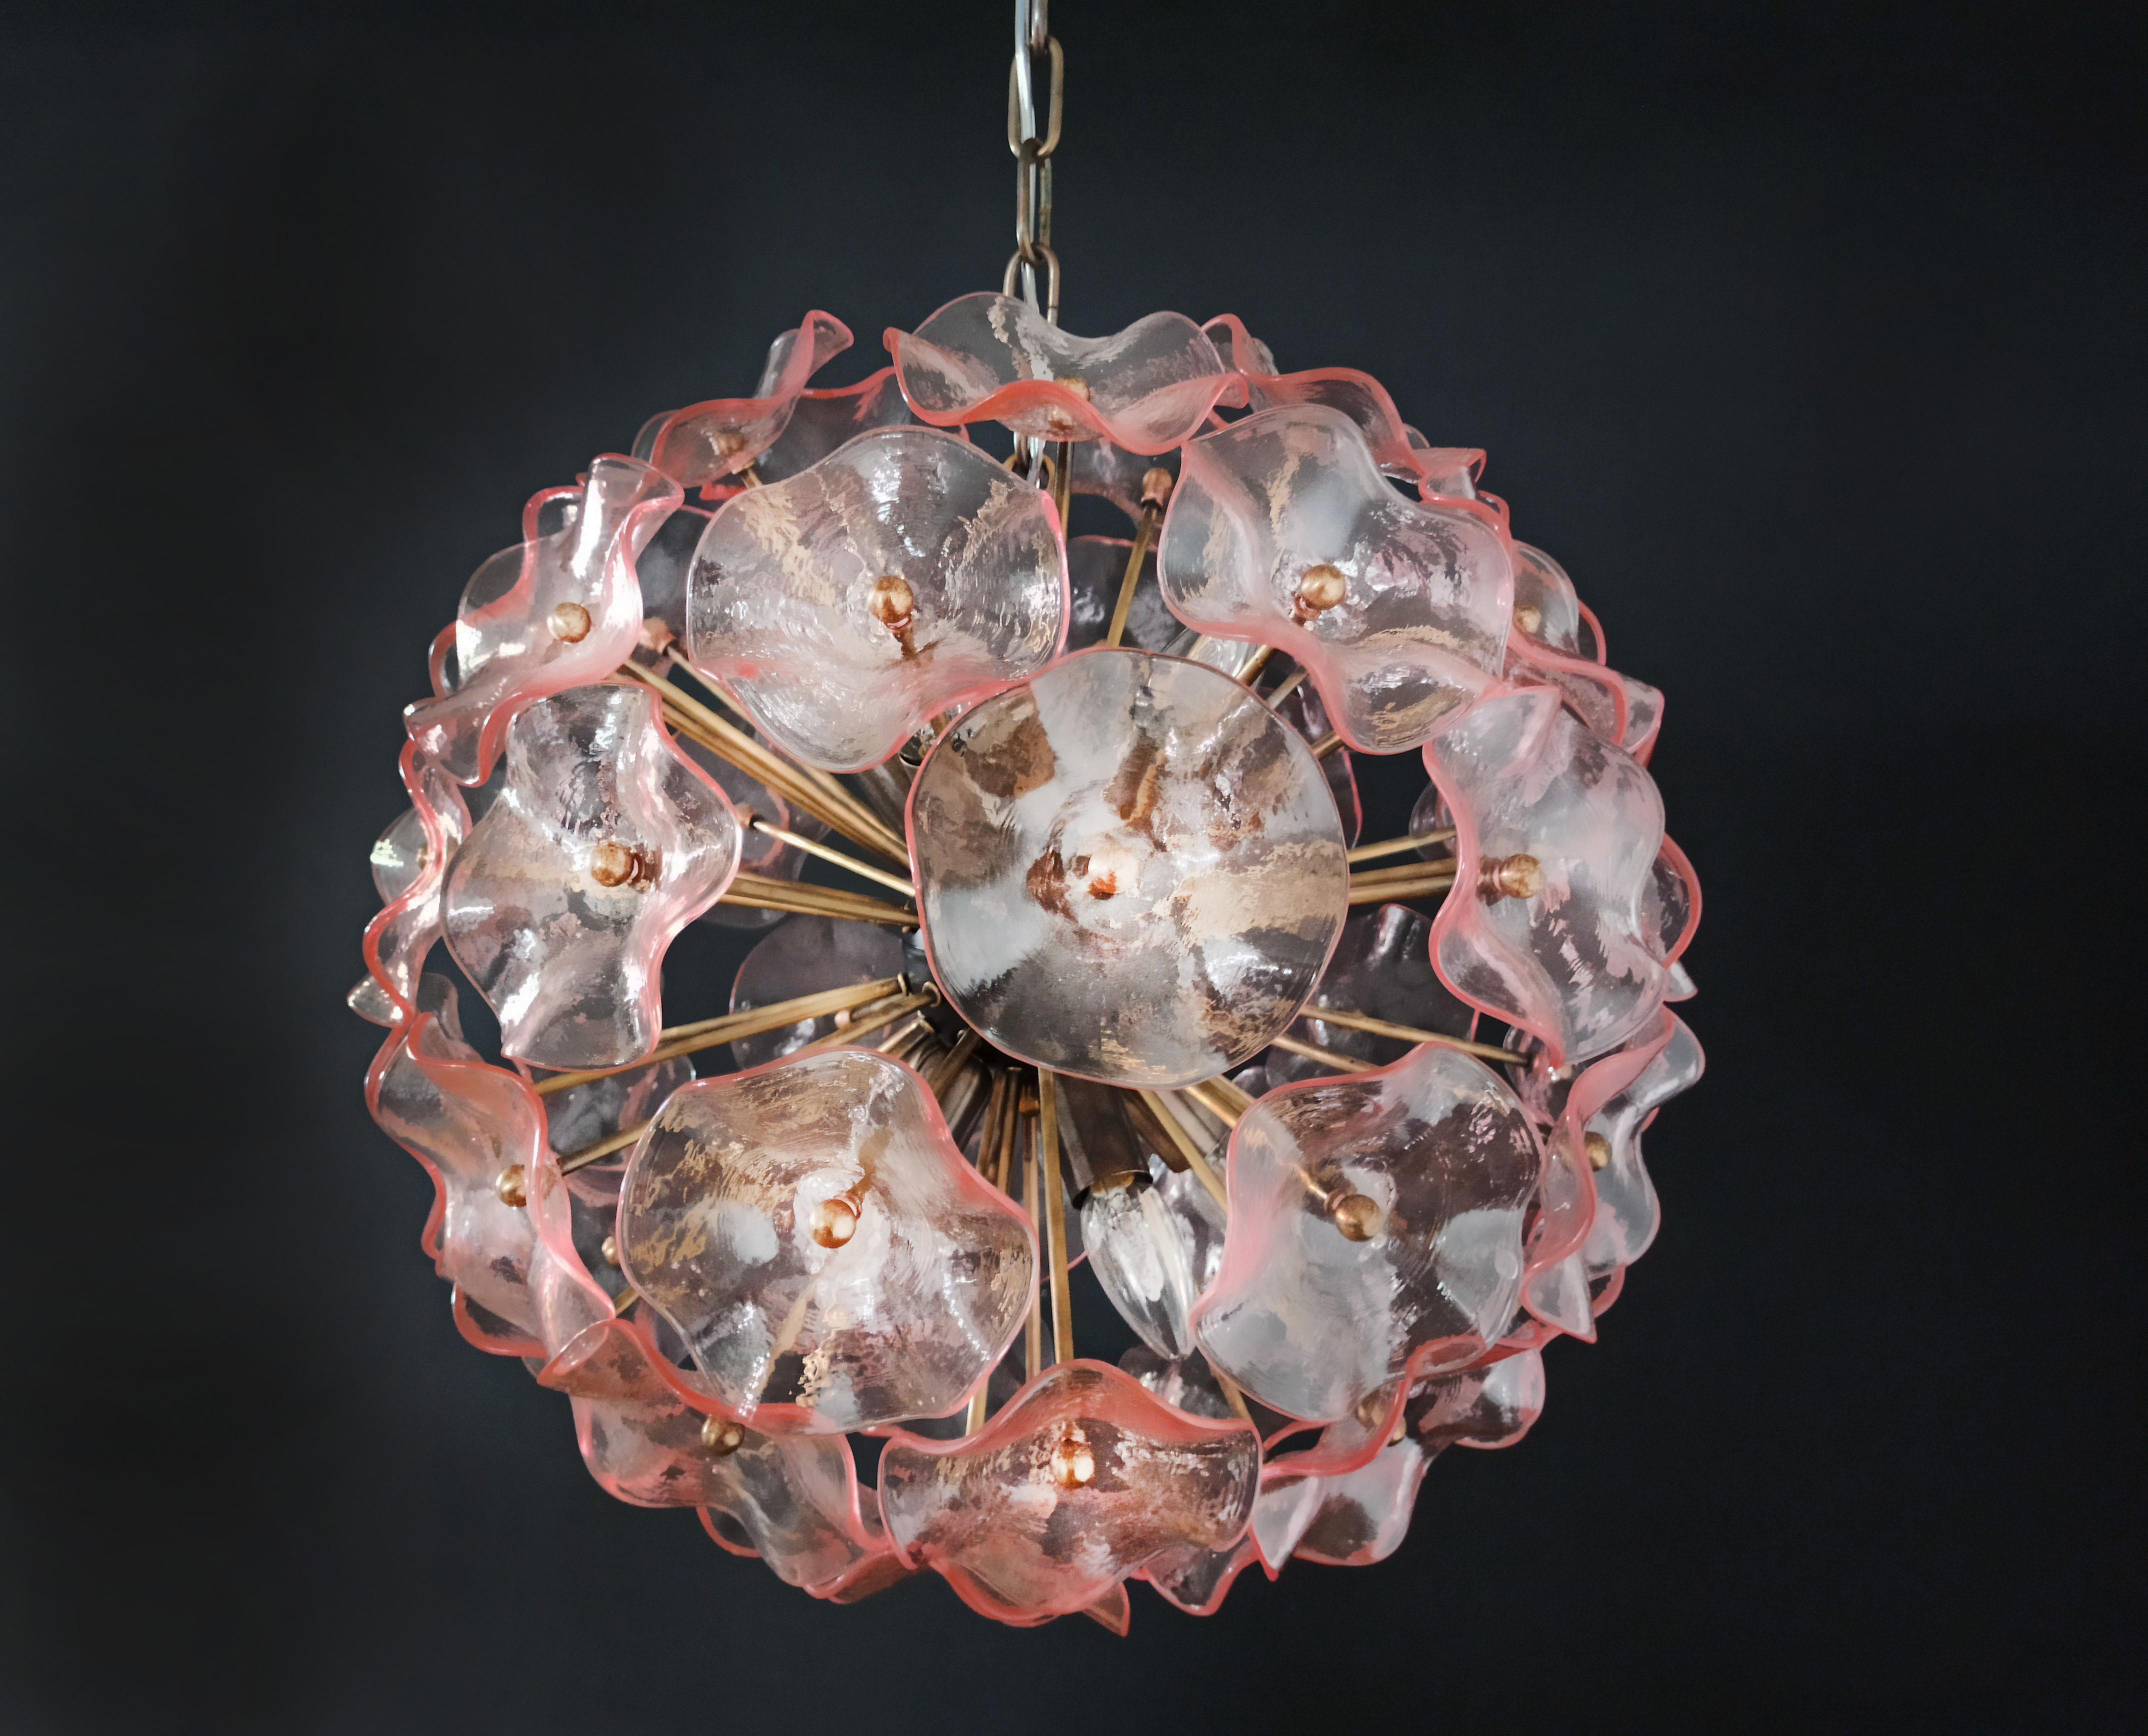 Amazing Sputnik Italian vintage crystal chandelier made by 51 pink crystals in a burnished brass metal frame.
Period: 1970’s / 1980's
Dimensions: 41,30 inches (105 cm) height with chain; 17,70 inches (45 cm) height without chain; 19,70 inches (50